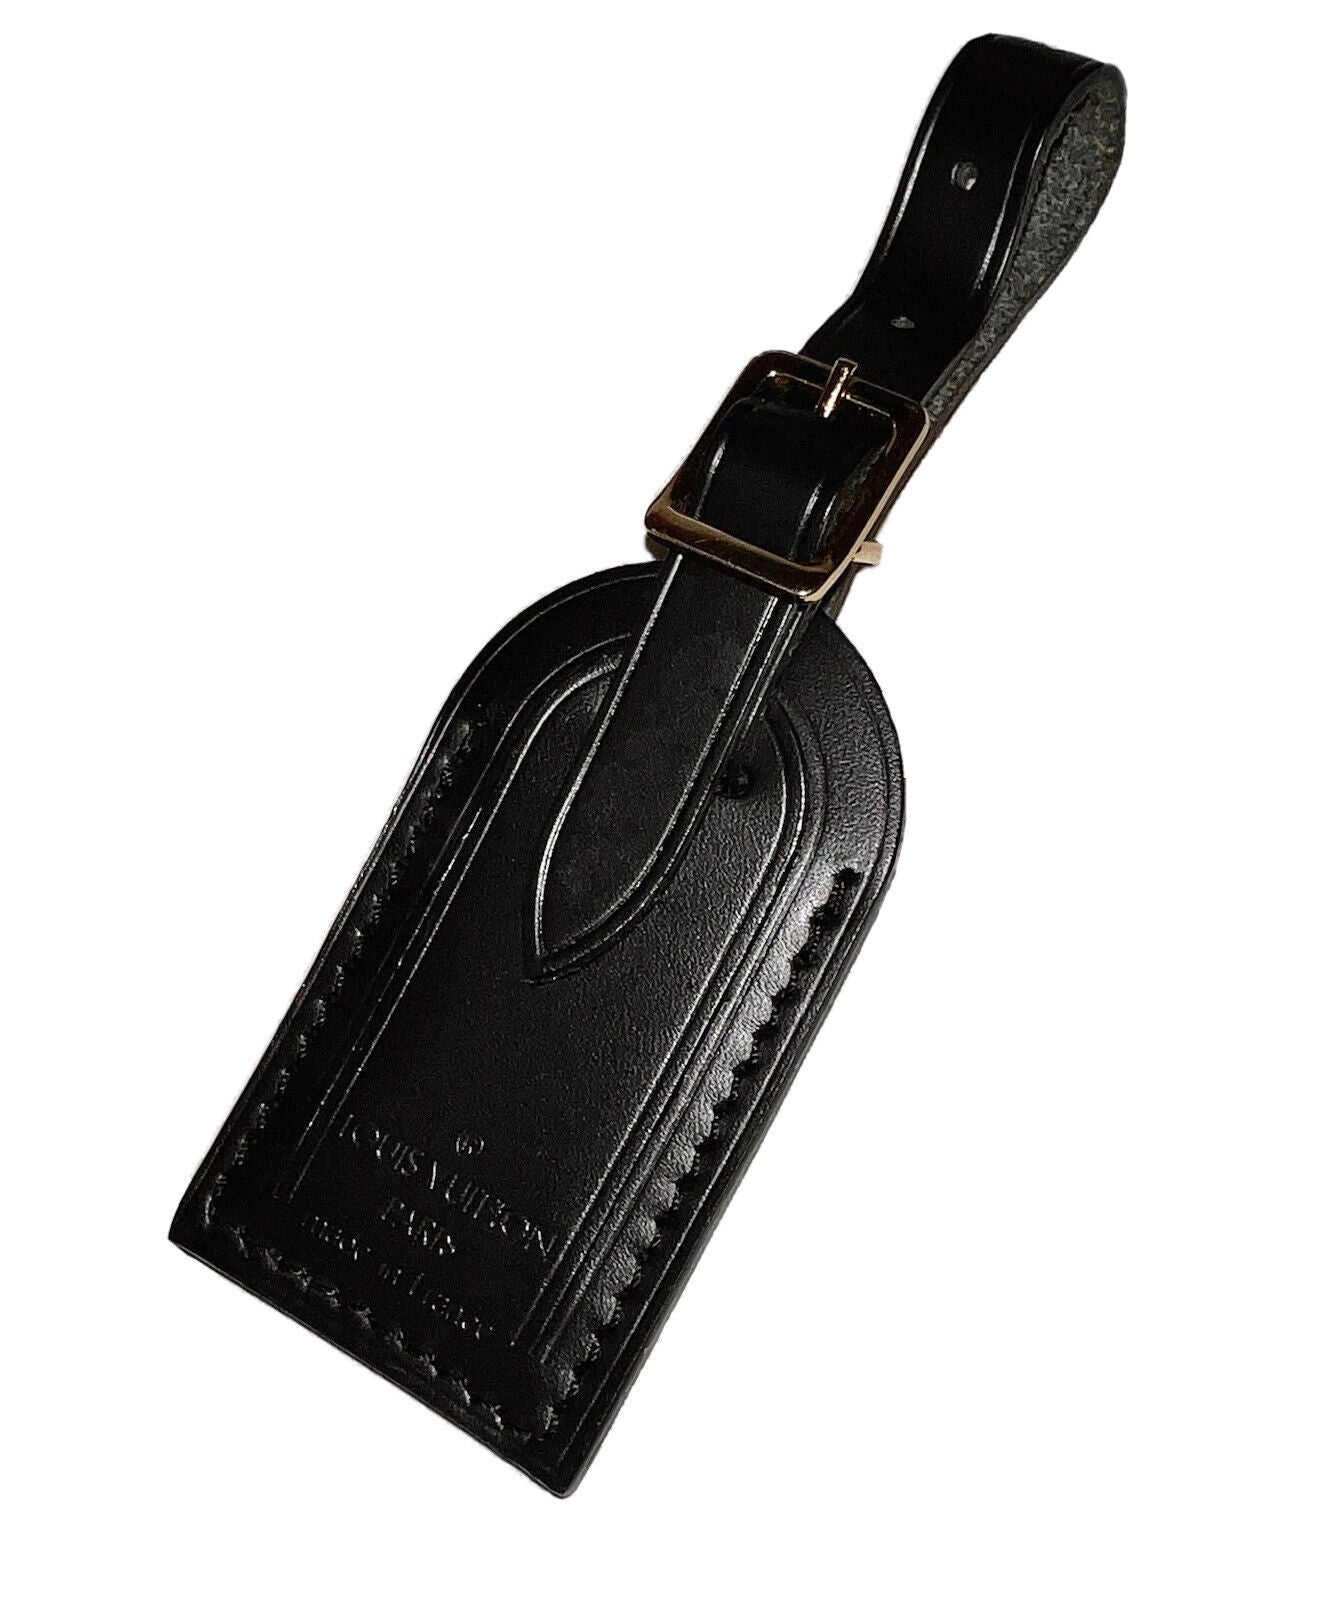 Louis Vuitton Luggage Tag Small Goldtone Black -0001 Authentic - 1 Piece